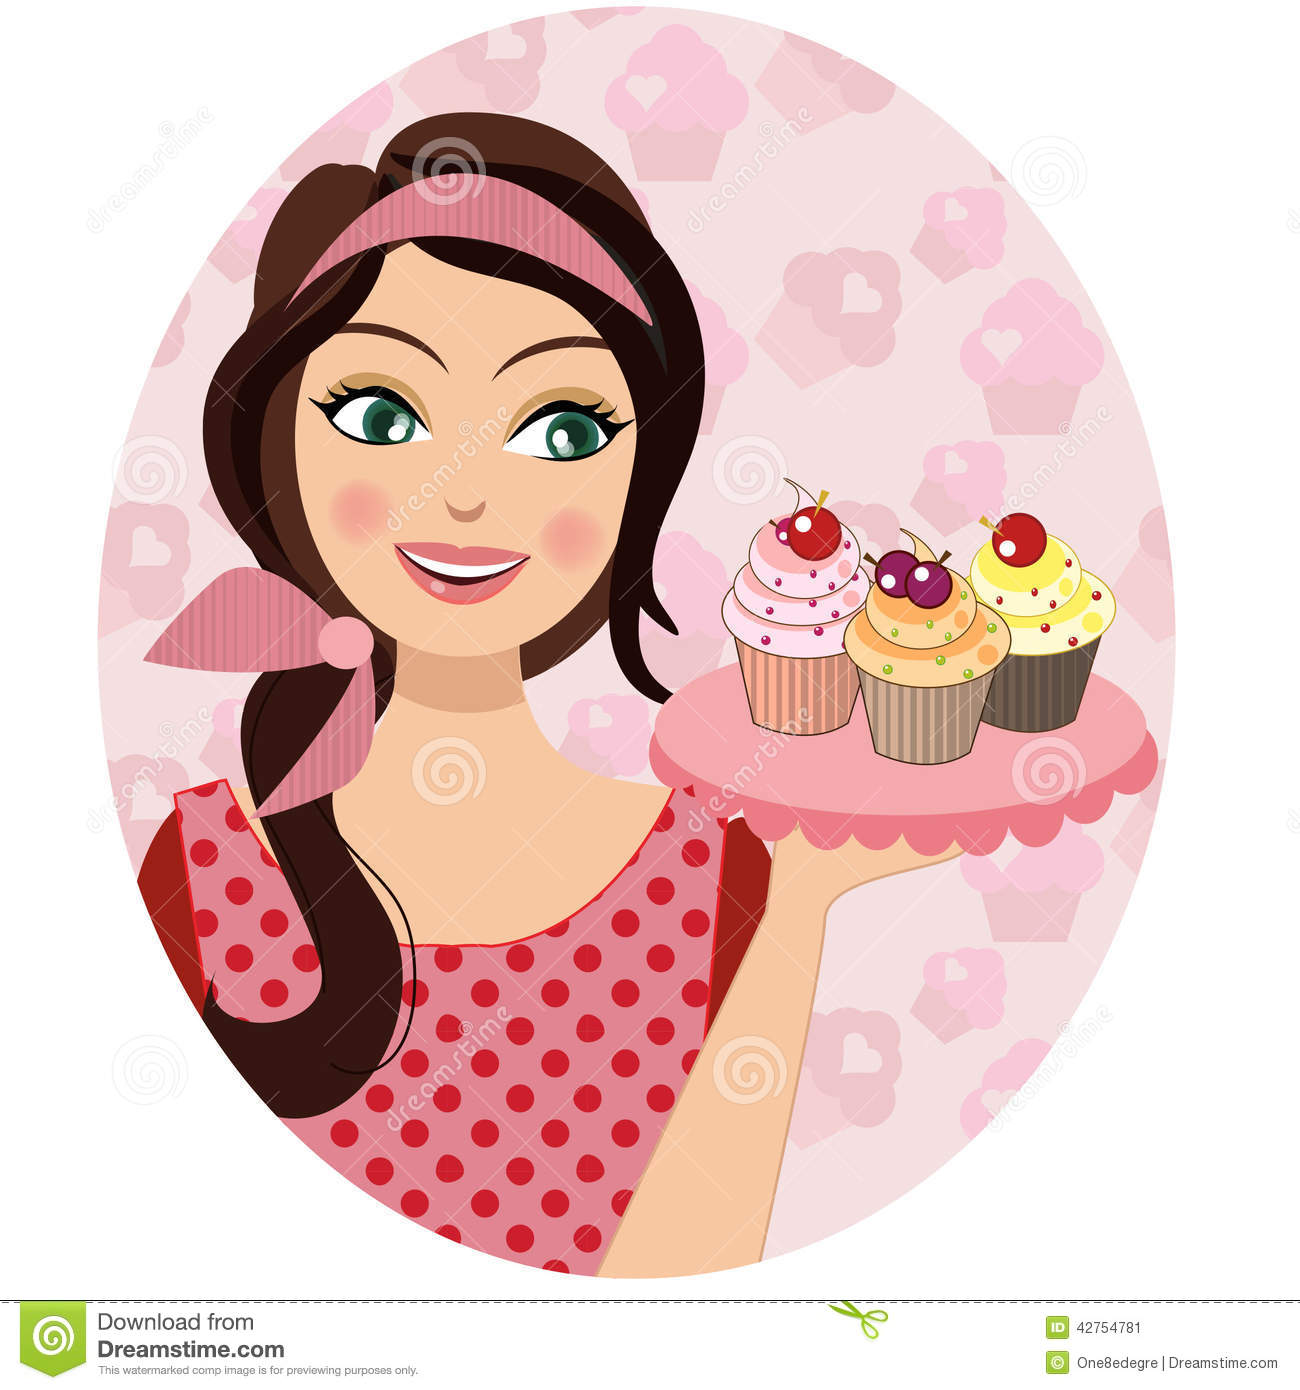 Holding Cupcakes A Baker Woman Stock Illustration   Image  42754781